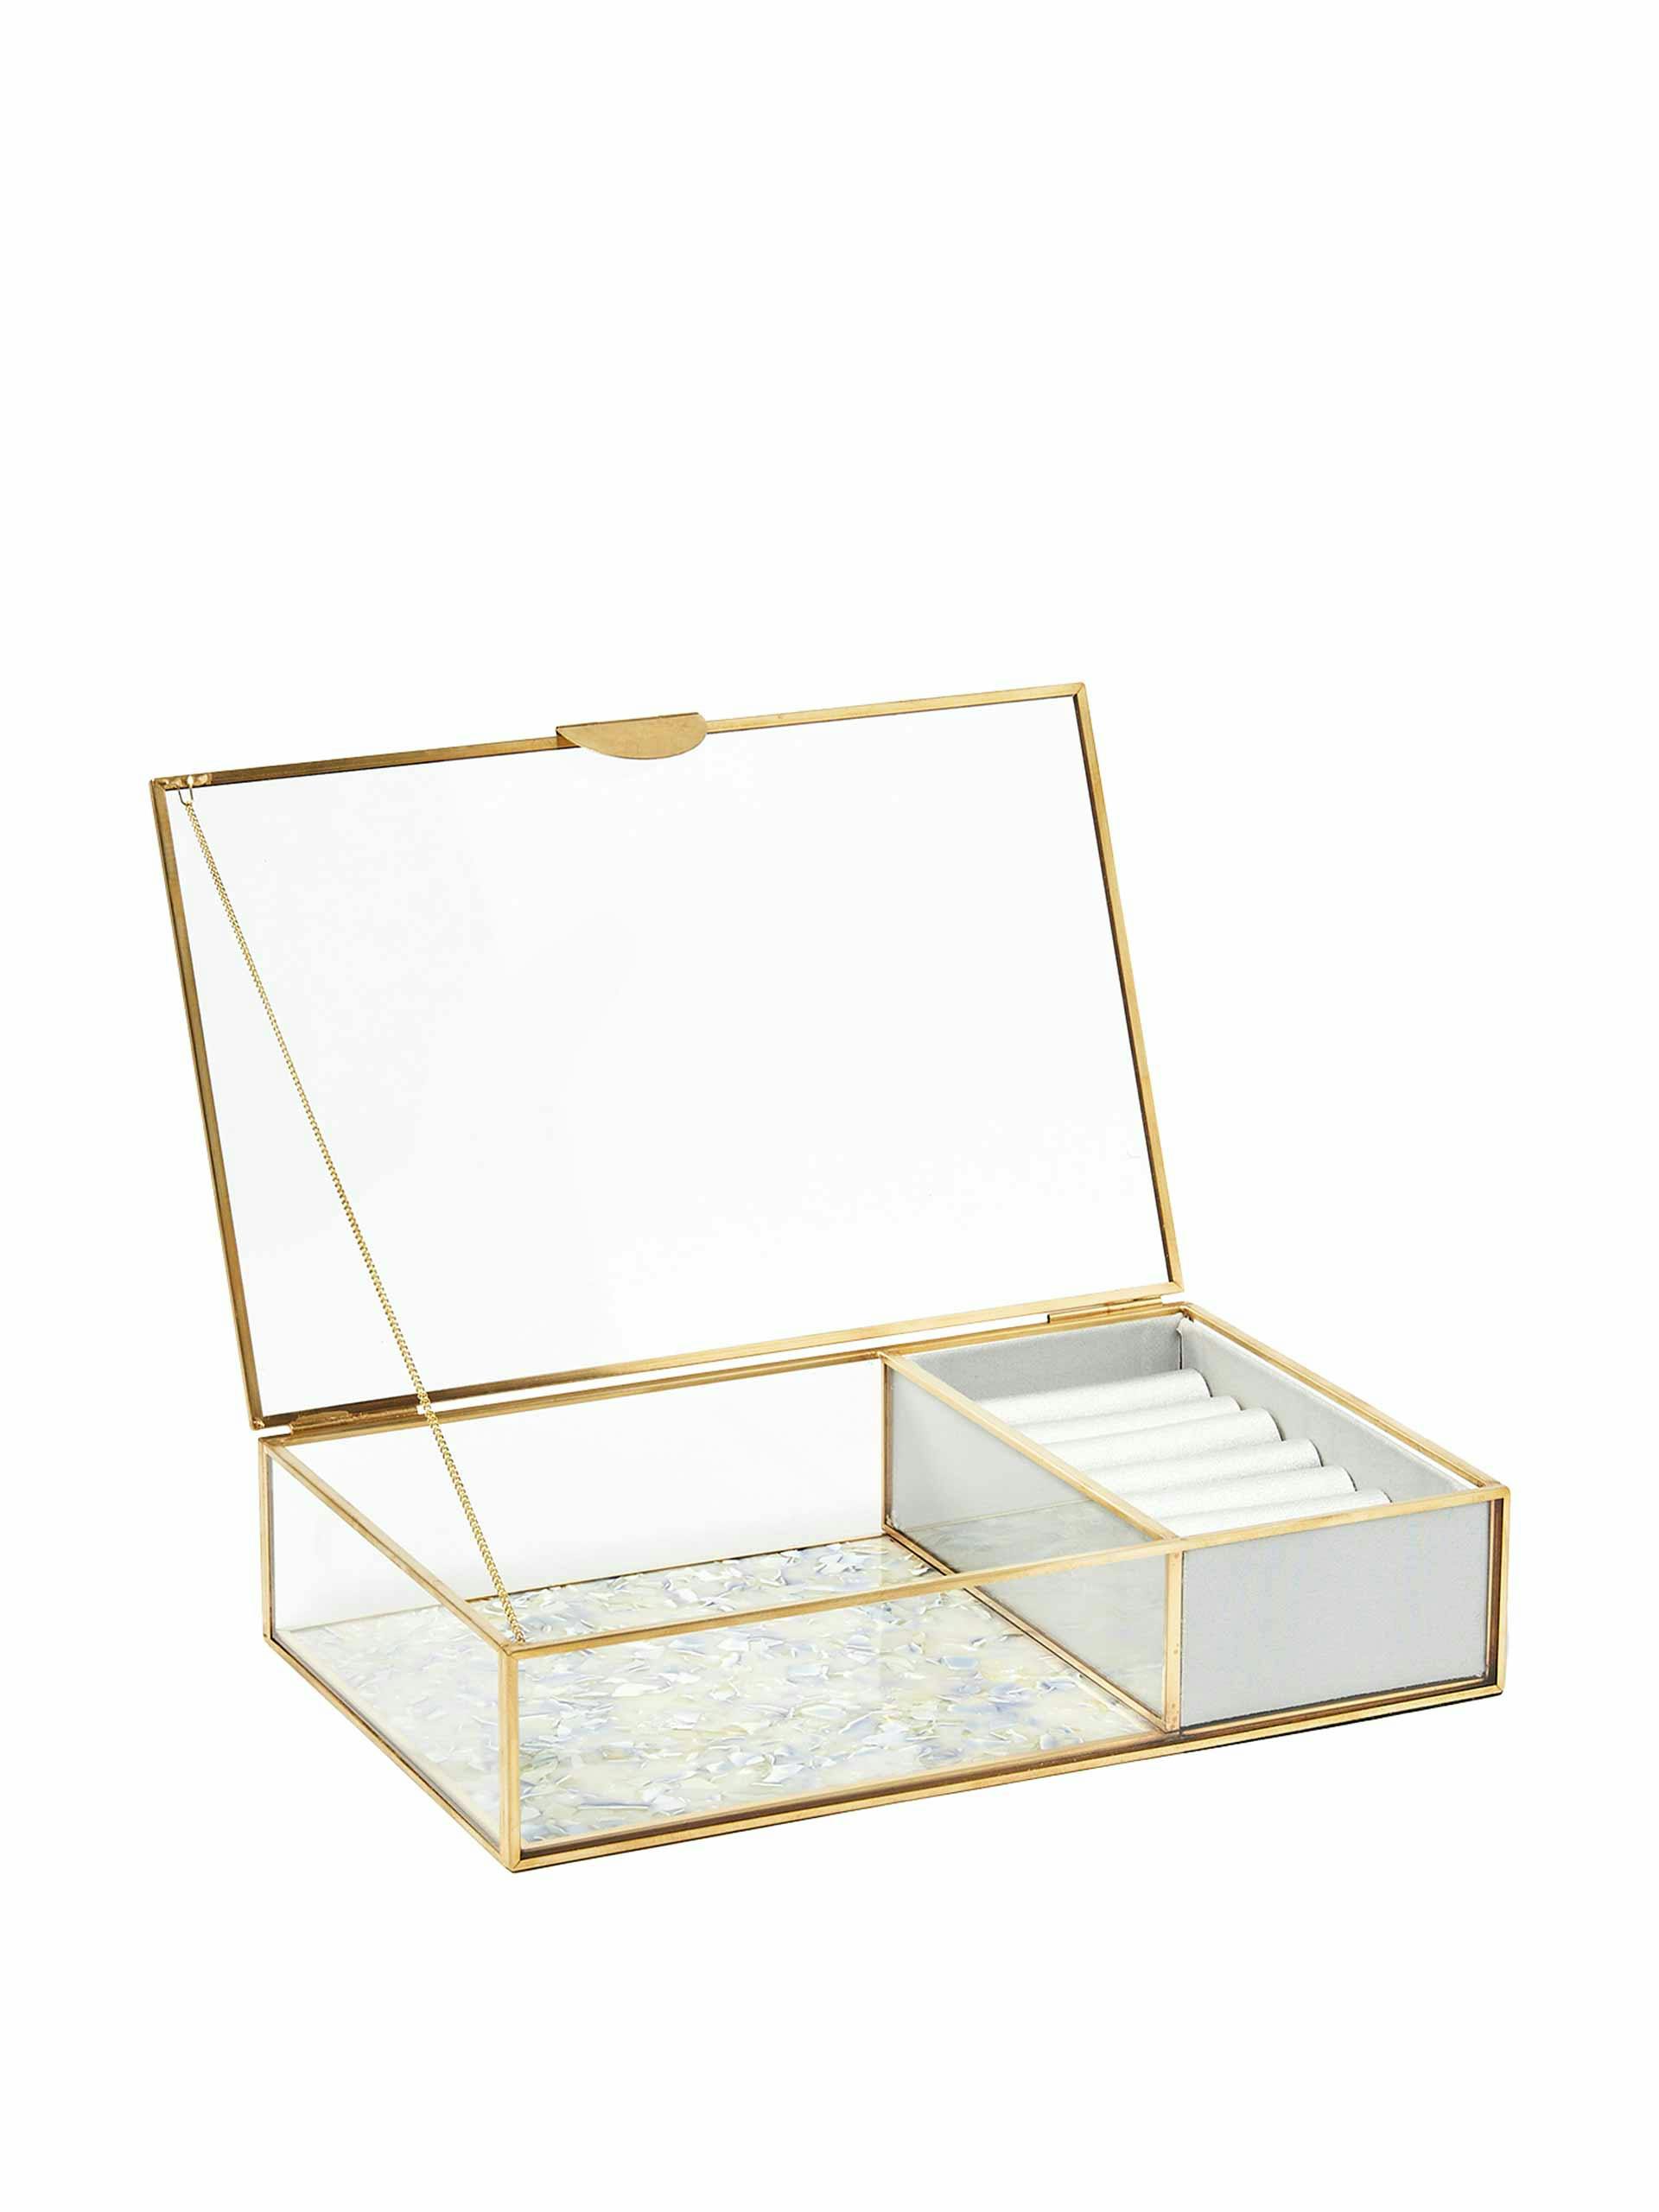 Gold and glass grey resin jewellery box